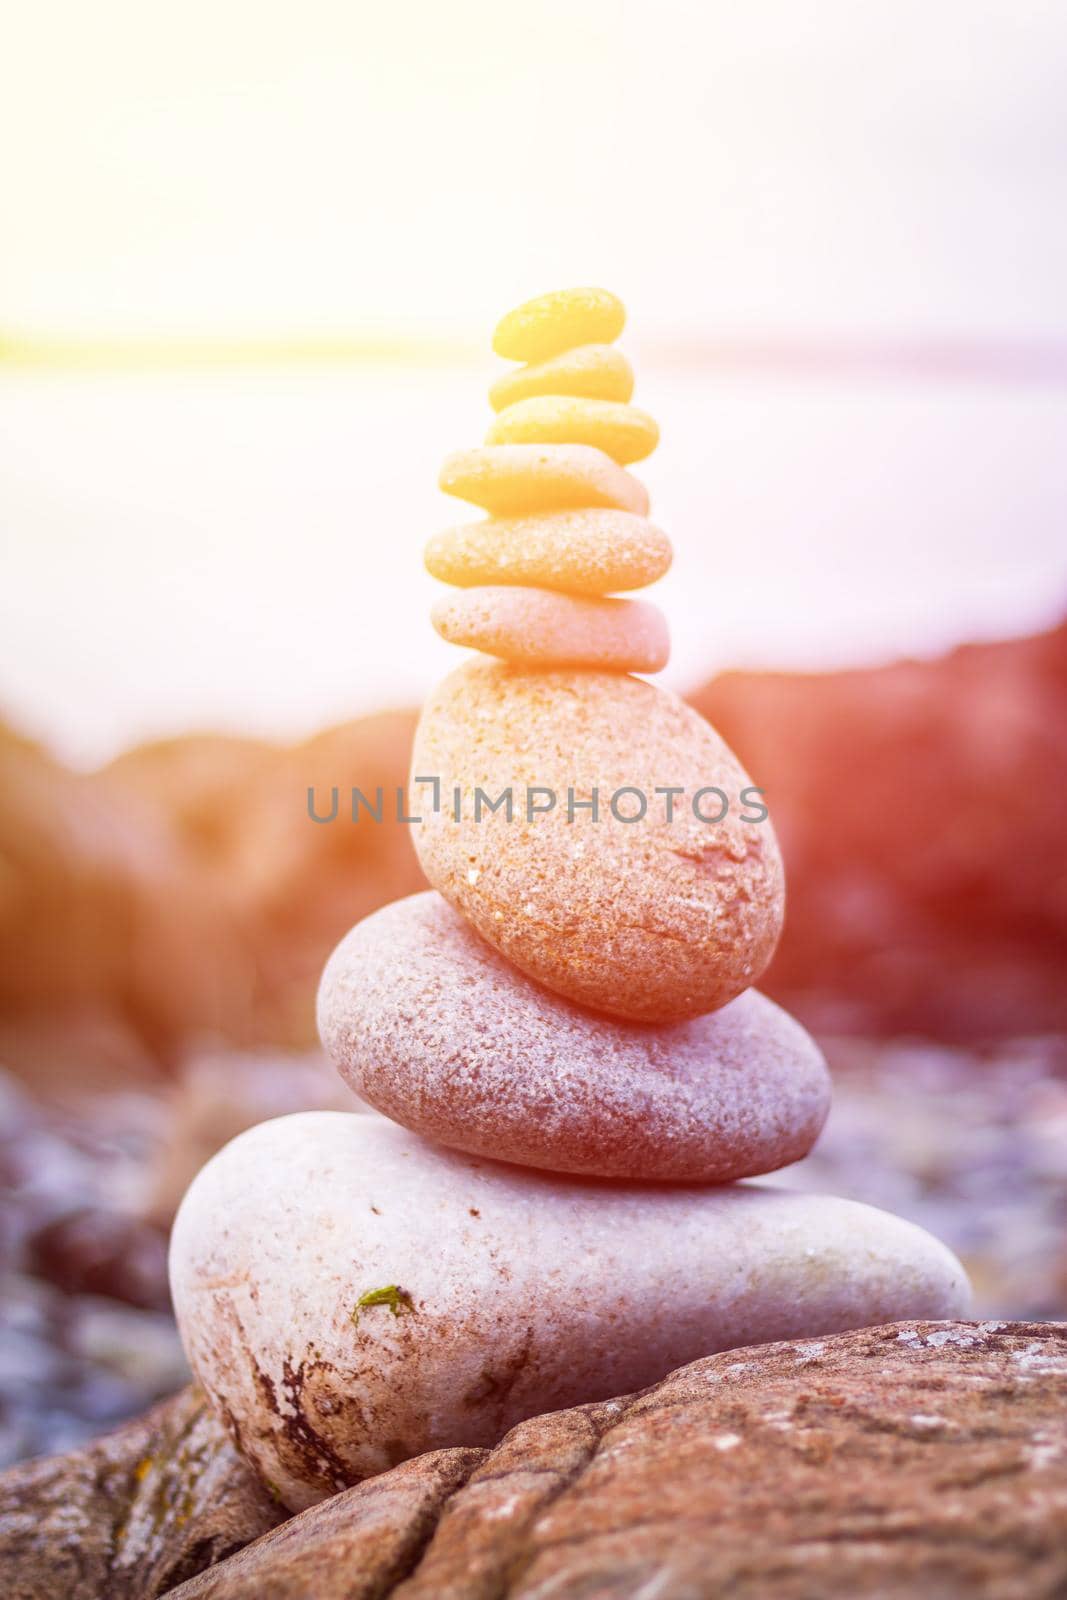 Balance, relaxation and wellness: Stone cairn outside, ocean in the blurry background. Sunshine. by Daxenbichler